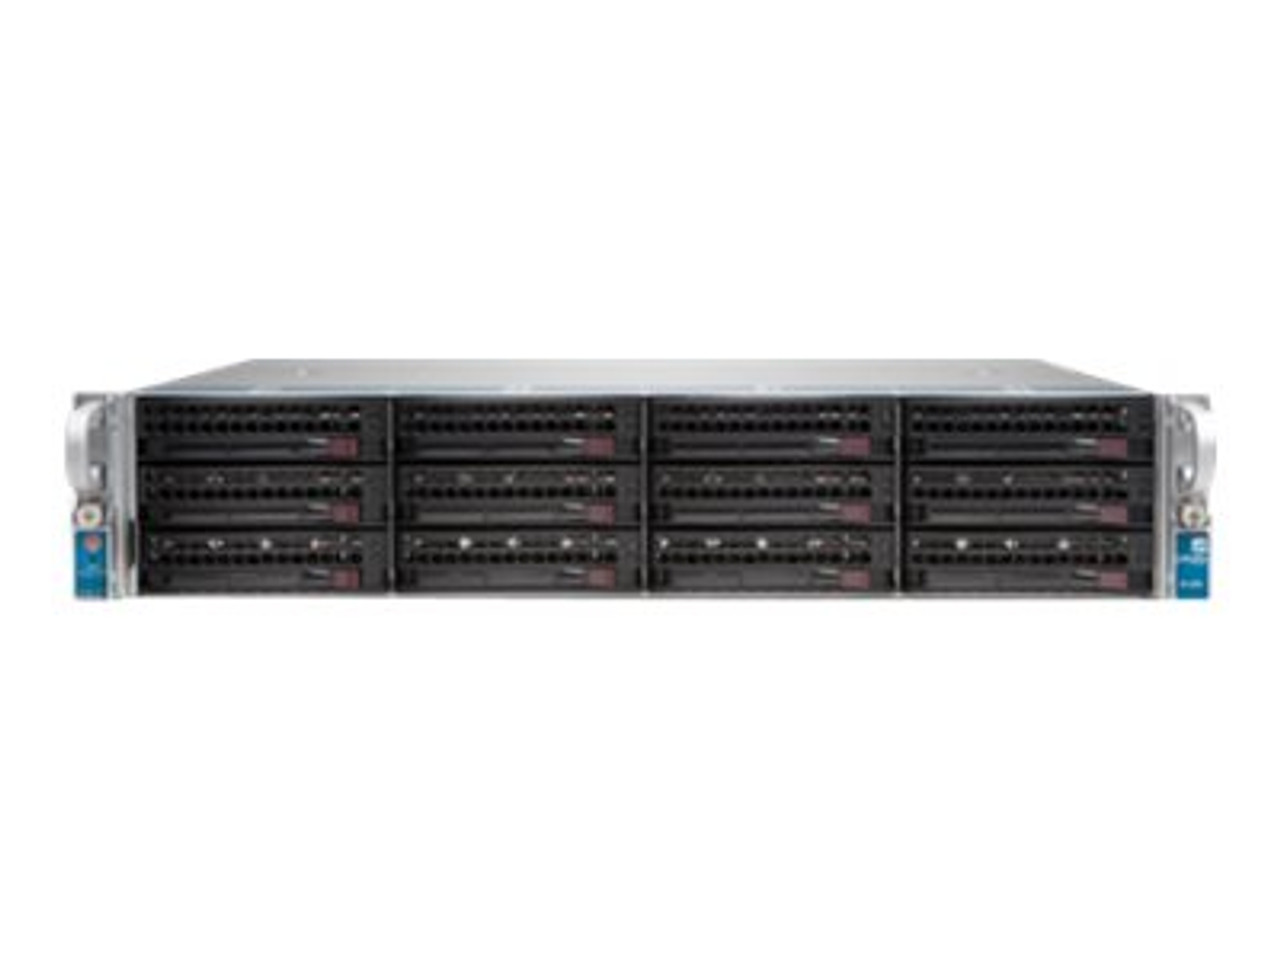 Palo Alto M-600 Management Appliance Palo Alto M-600 chassis with 16TB storage (4x8TB RAID certified drives) and 4 post rack mount rails